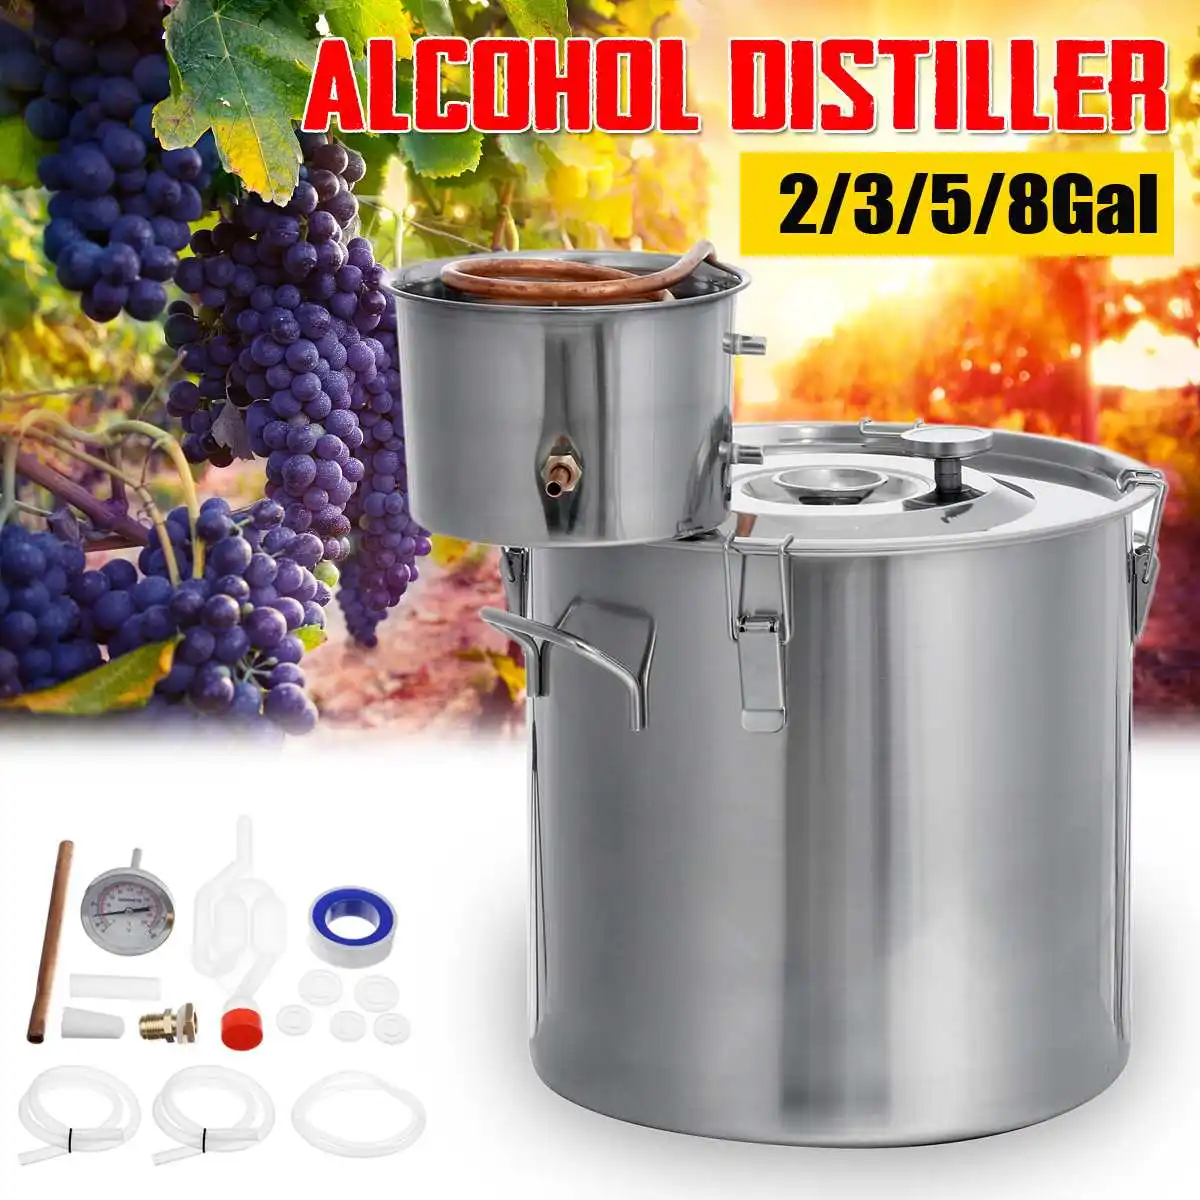 

10L/12L/20L/30L Distiller Alambic Moonshine Alcohol Still Stainless Copper DIY Home Brew Water Wine Essential Oil Brewing Kit